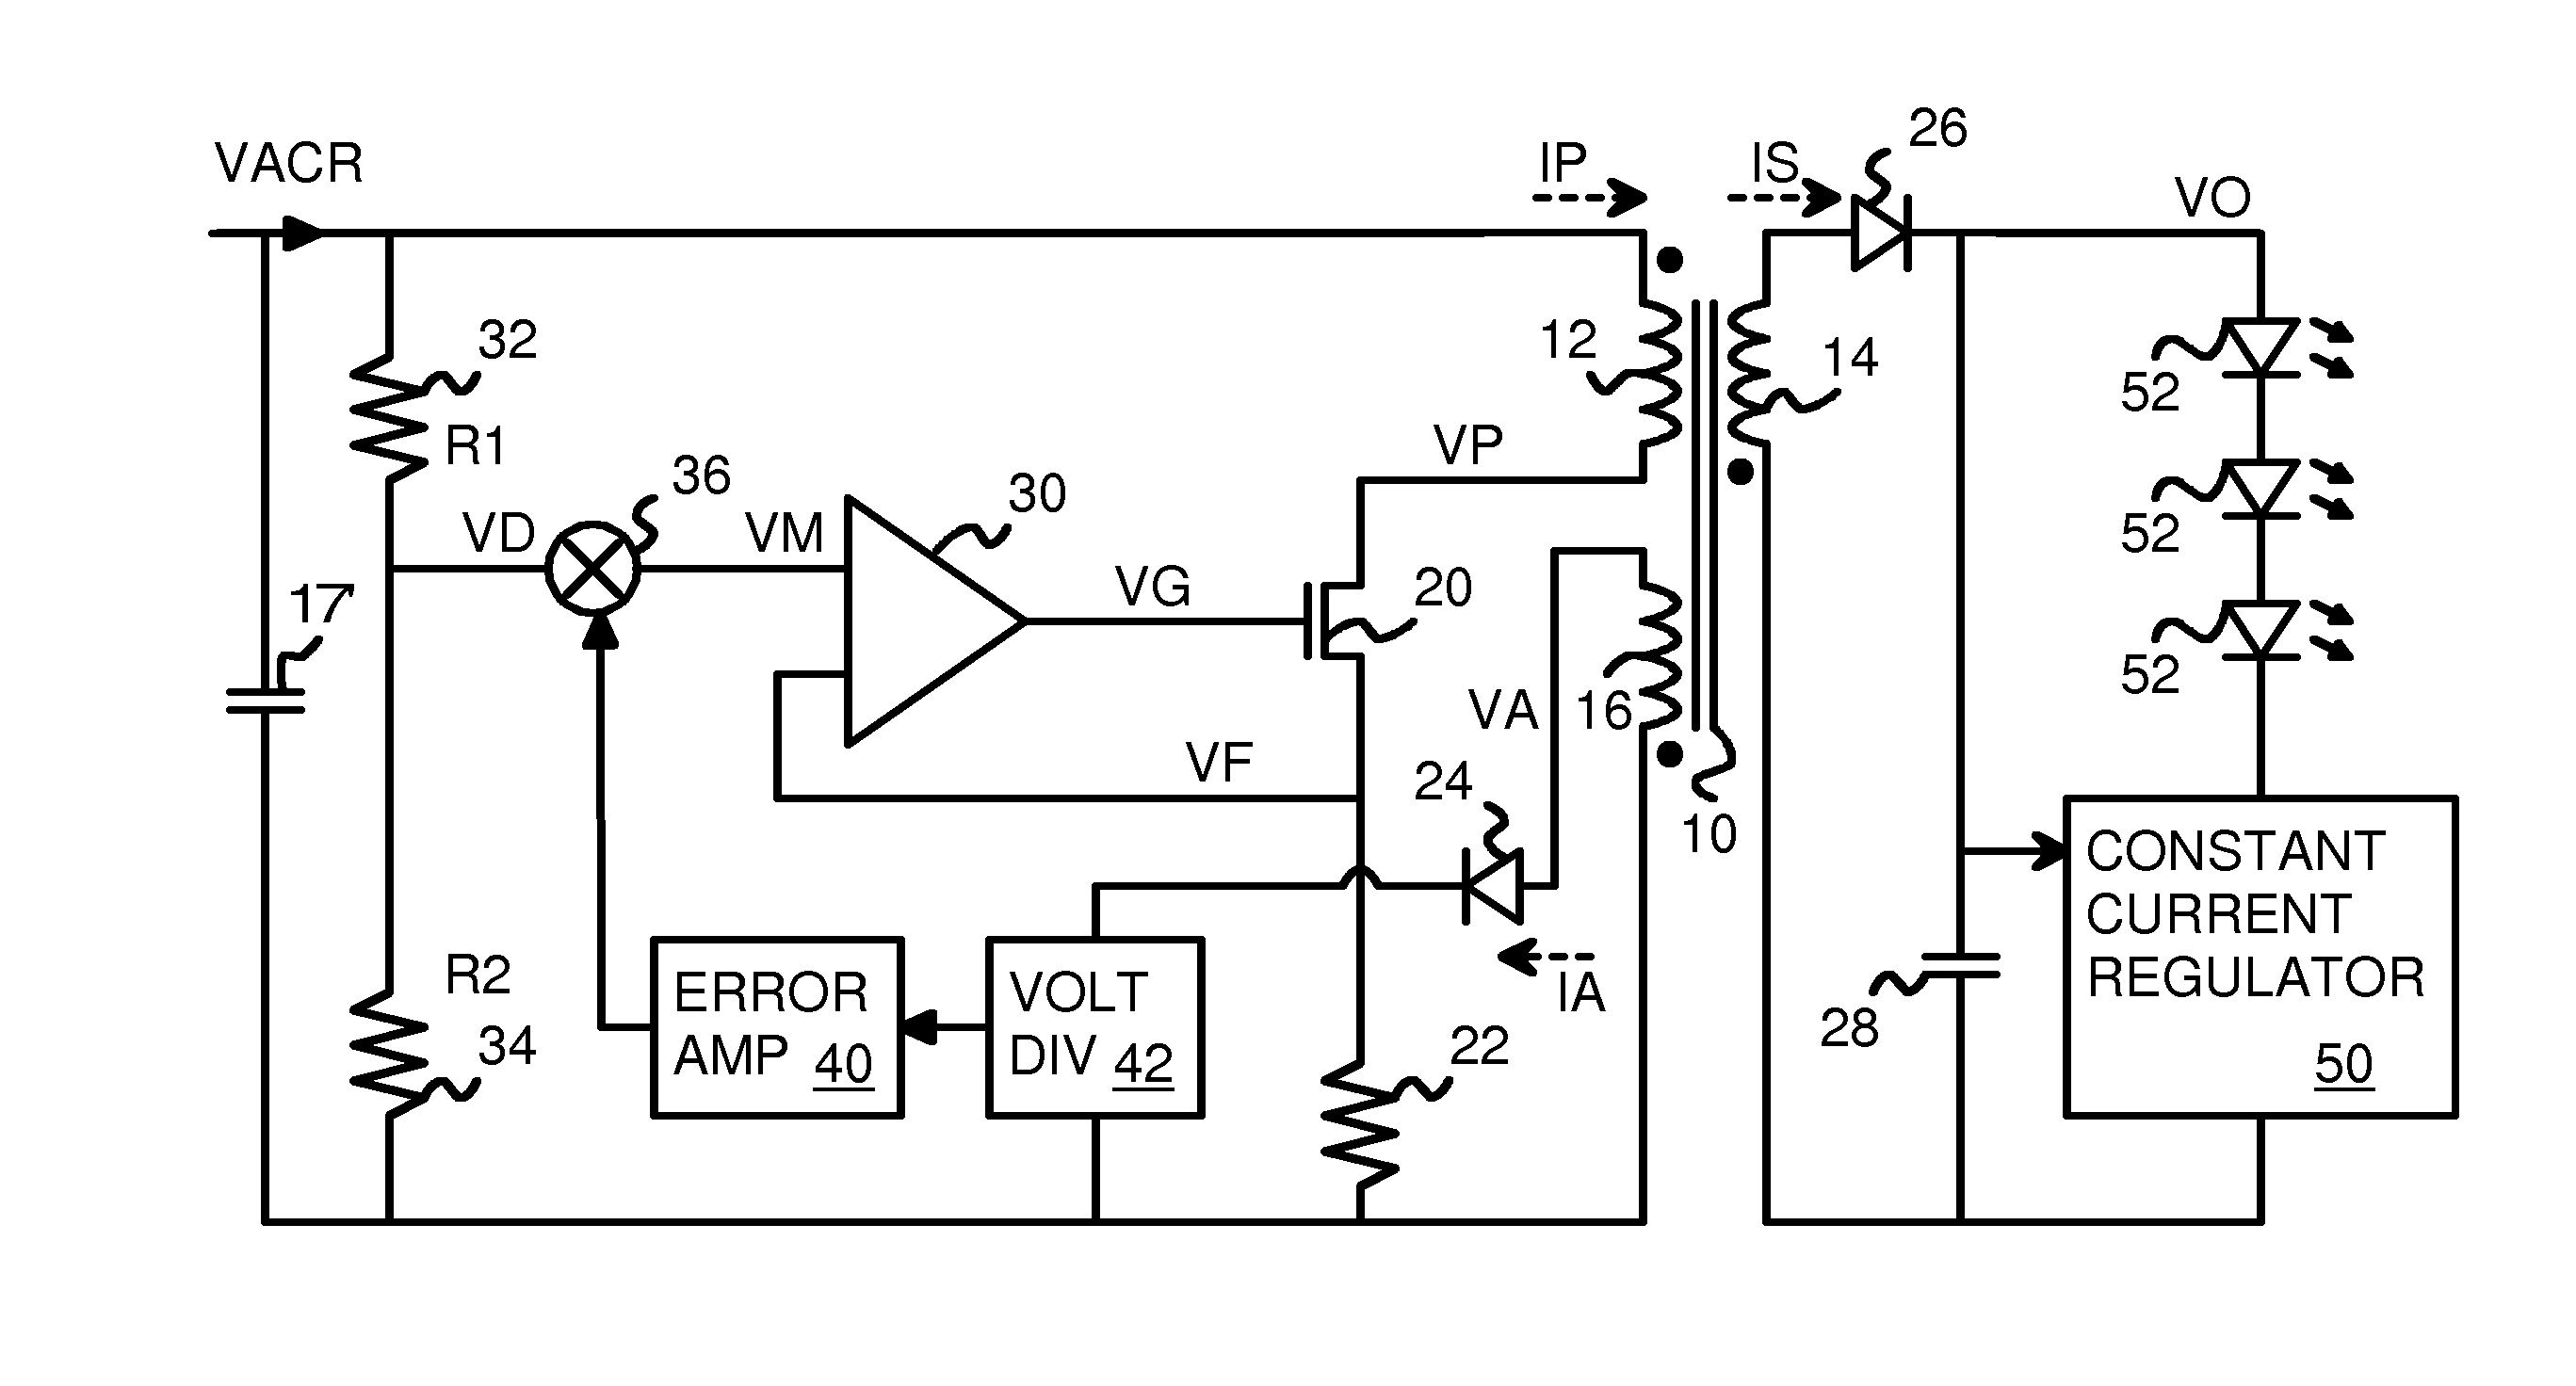 LED Driver with Small Output Ripple Without Requiring a High-Voltage Primary-Side Electrolytic Capacitor